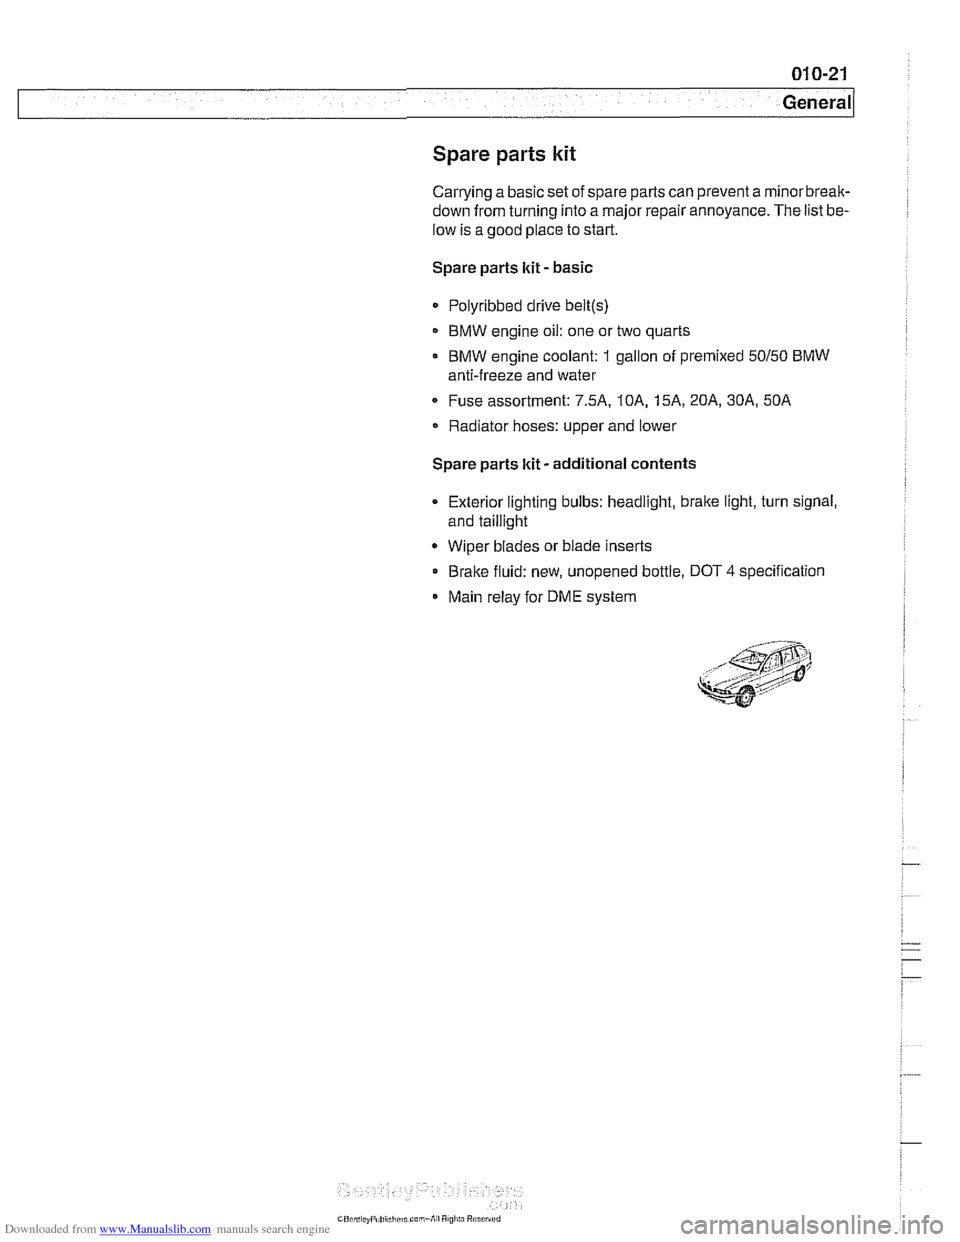 BMW 530i 1999 E39 Workshop Manual Downloaded from www.Manualslib.com manuals search engine 
Spare parts kit 
Carrying a basic set of spare parts can prevent  a rninorbreak- 
down from turning  into a major  repair annoyance.  The list